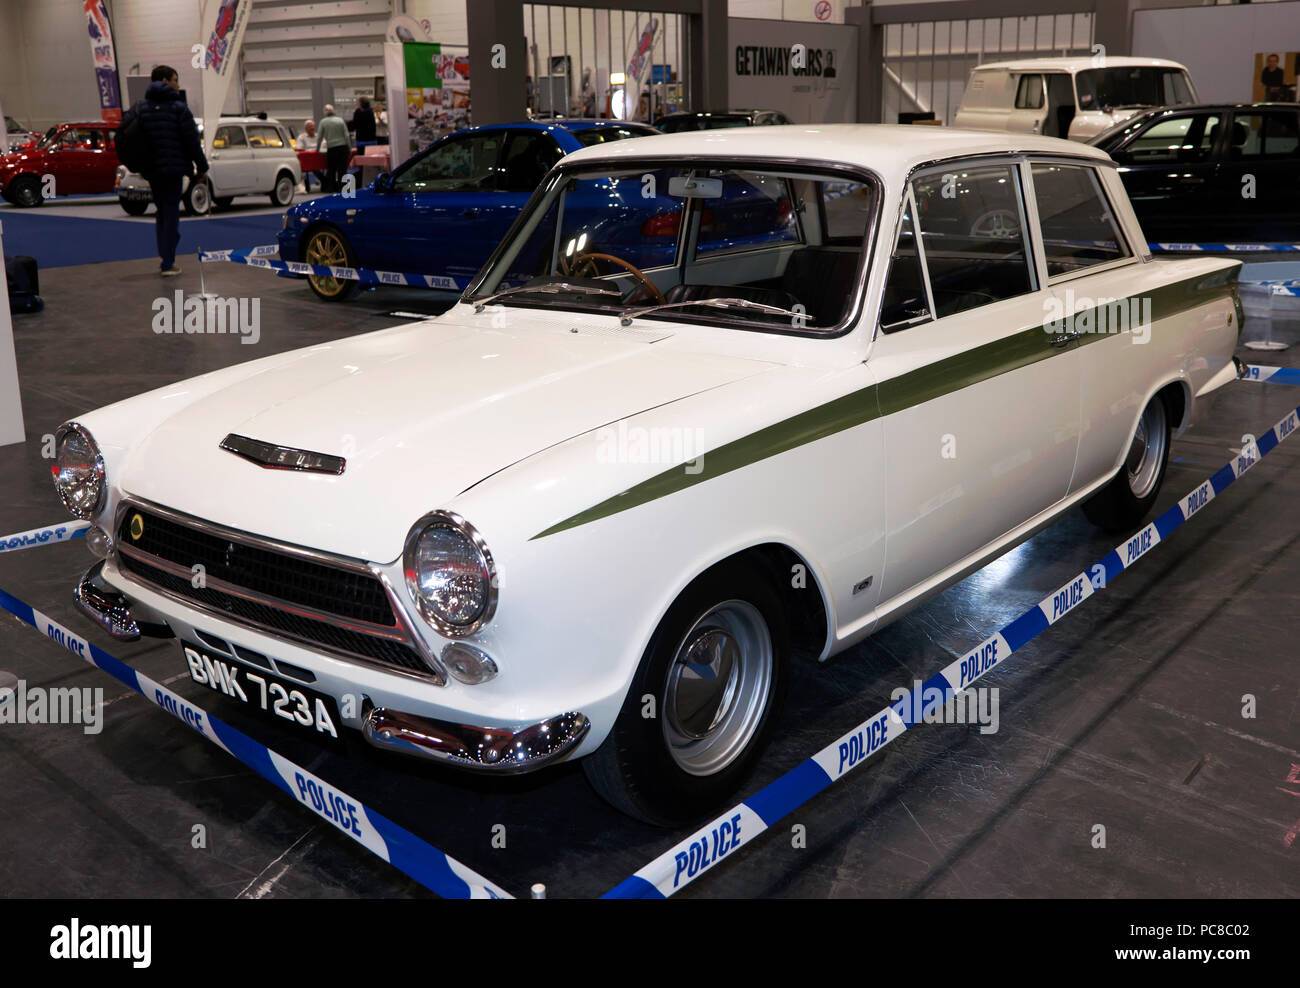 A Lotus Cortina Mk1 used  by Bruce Reynolds during 'The Great Train Robbery' on display in the Getaway Car Feature at the London Classic Car Show 2018 Stock Photo